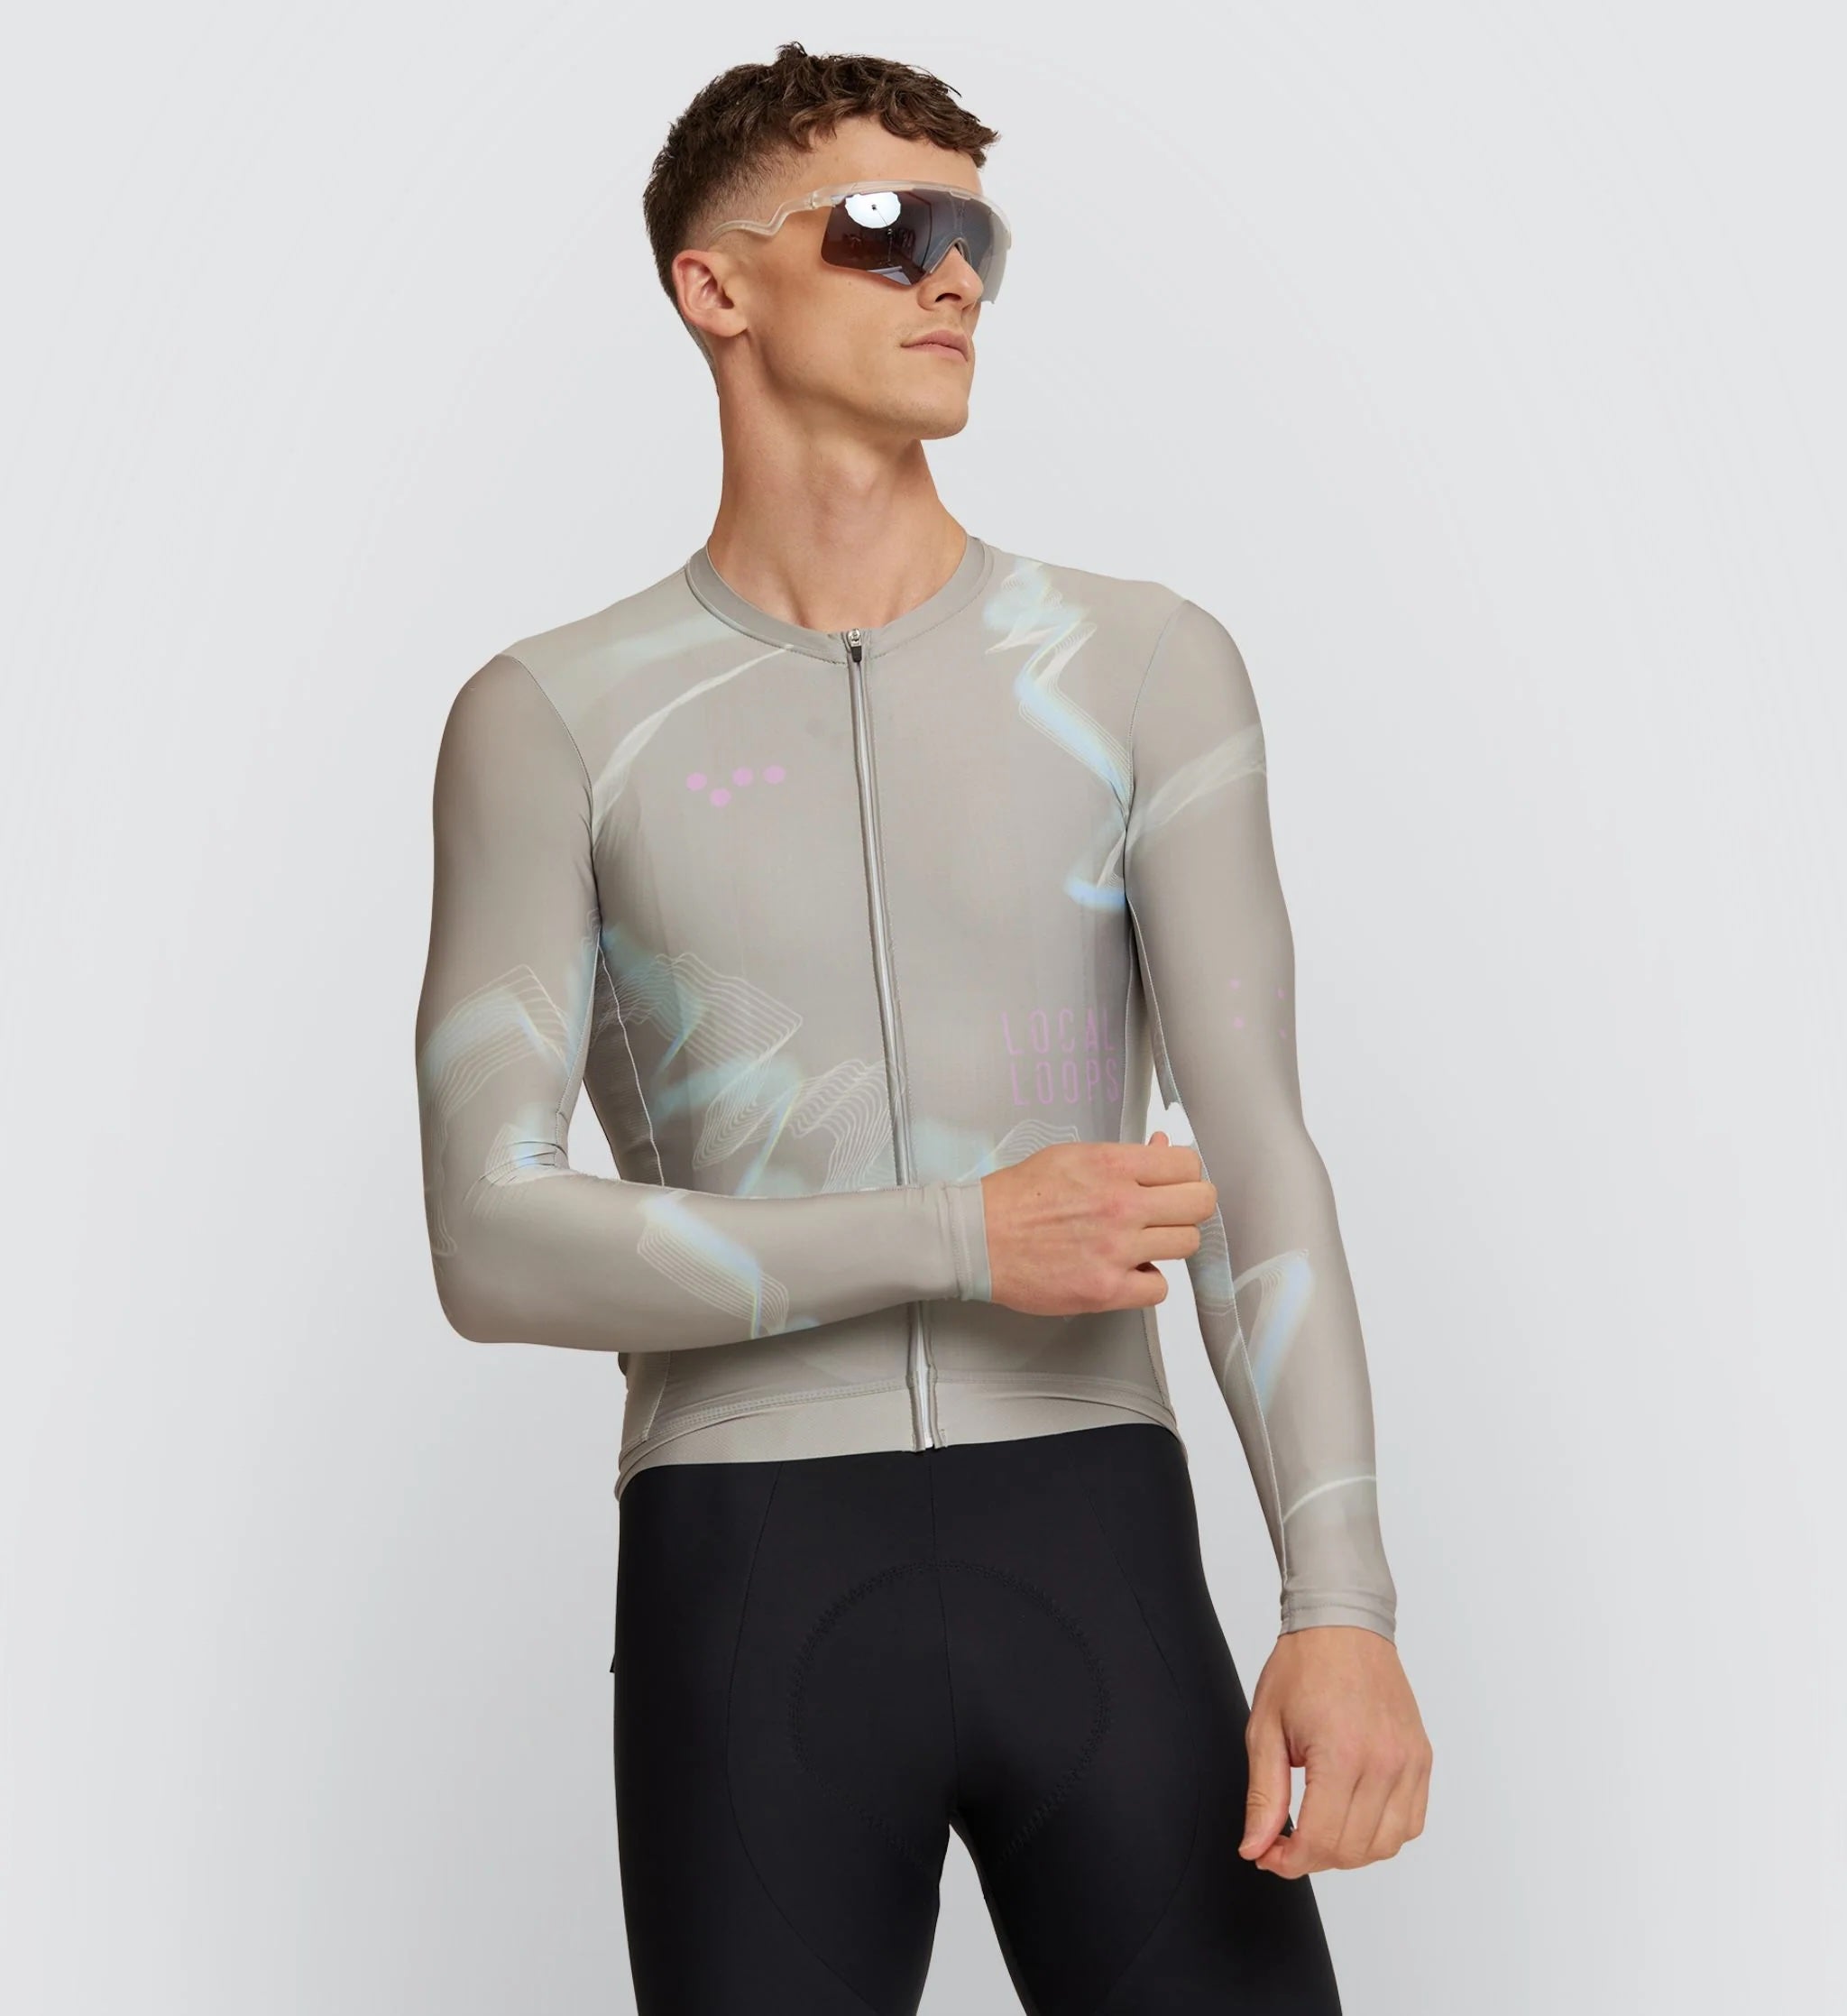 Local Loops Classic Long Sleeve Jersey